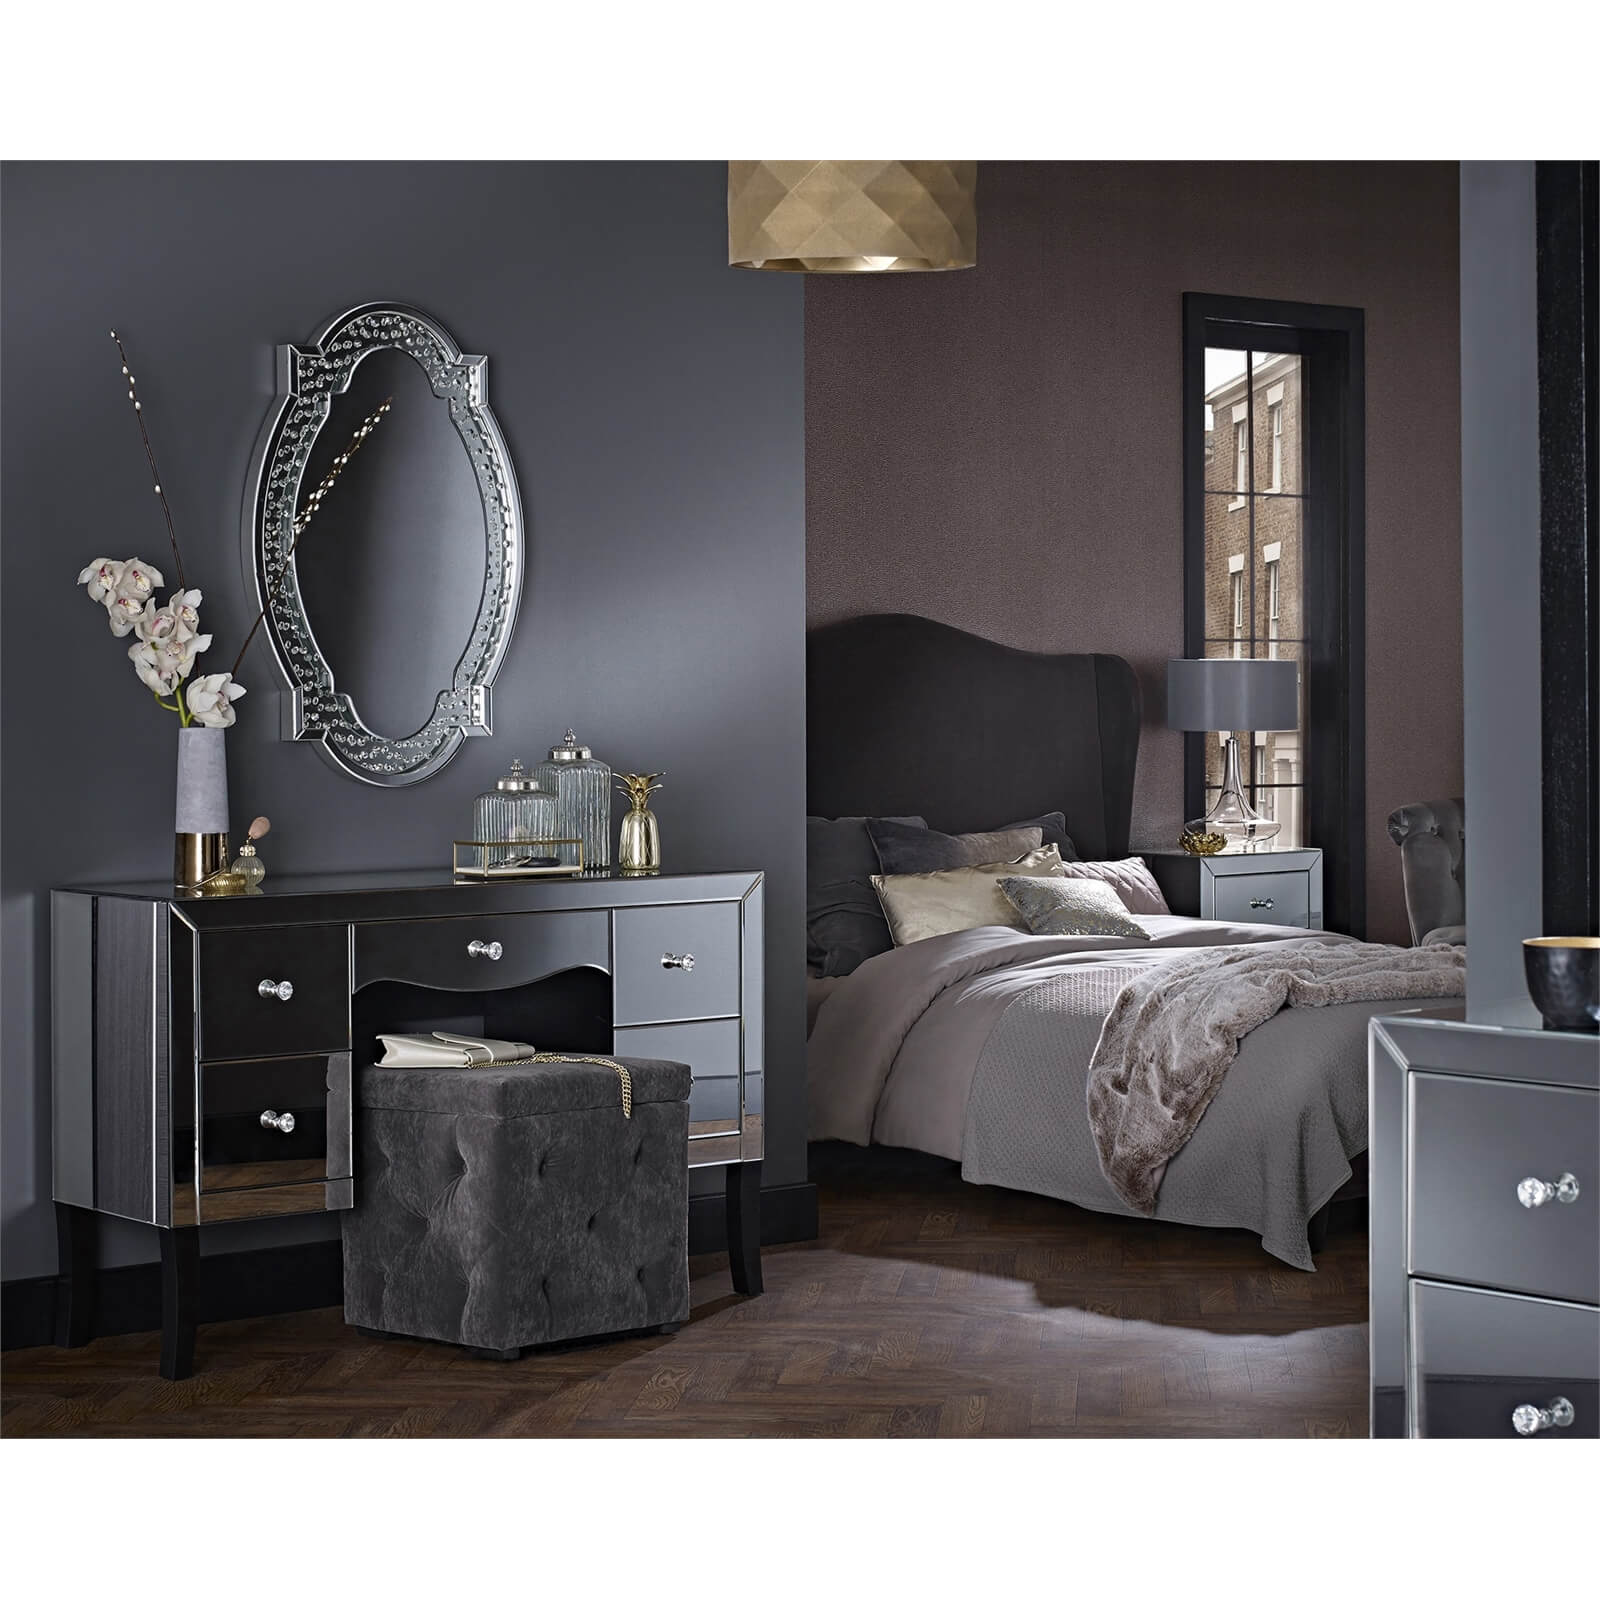 Valentina Dressing Table - Mirrored